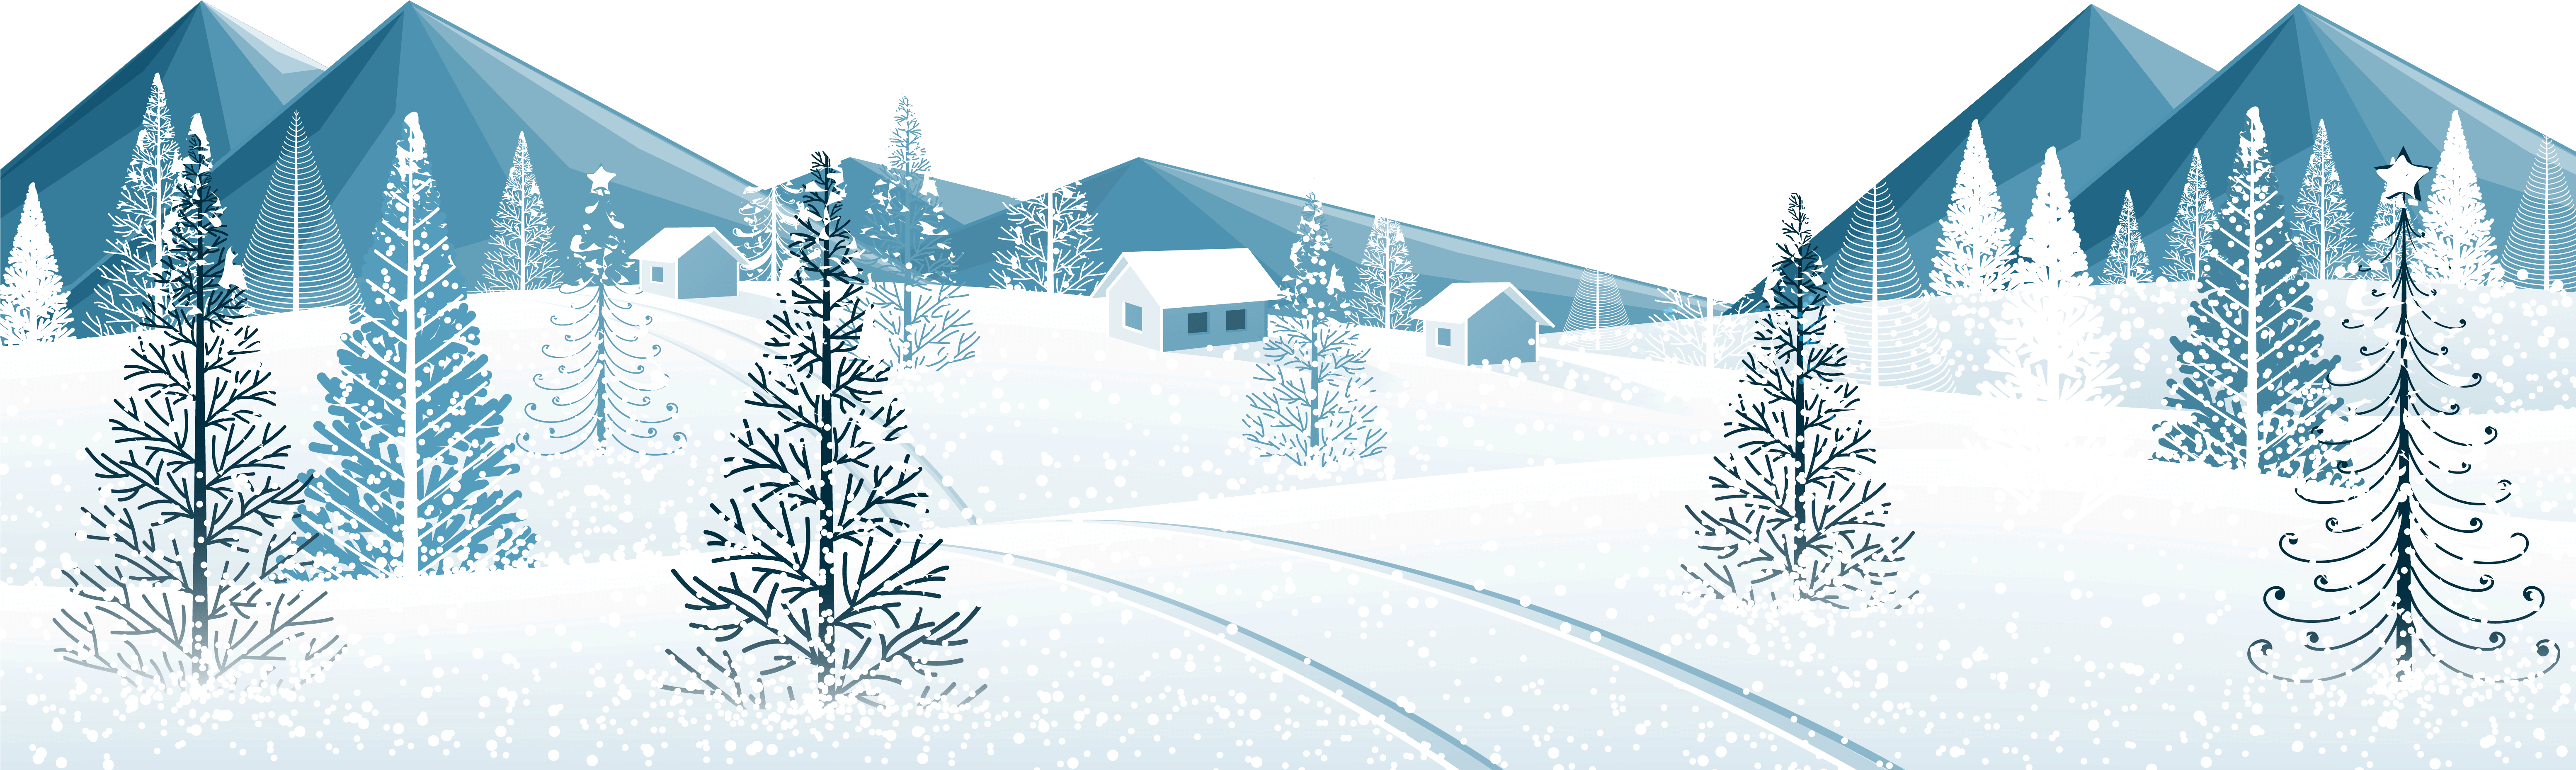 A Snowy Landscape With Houses And Trees